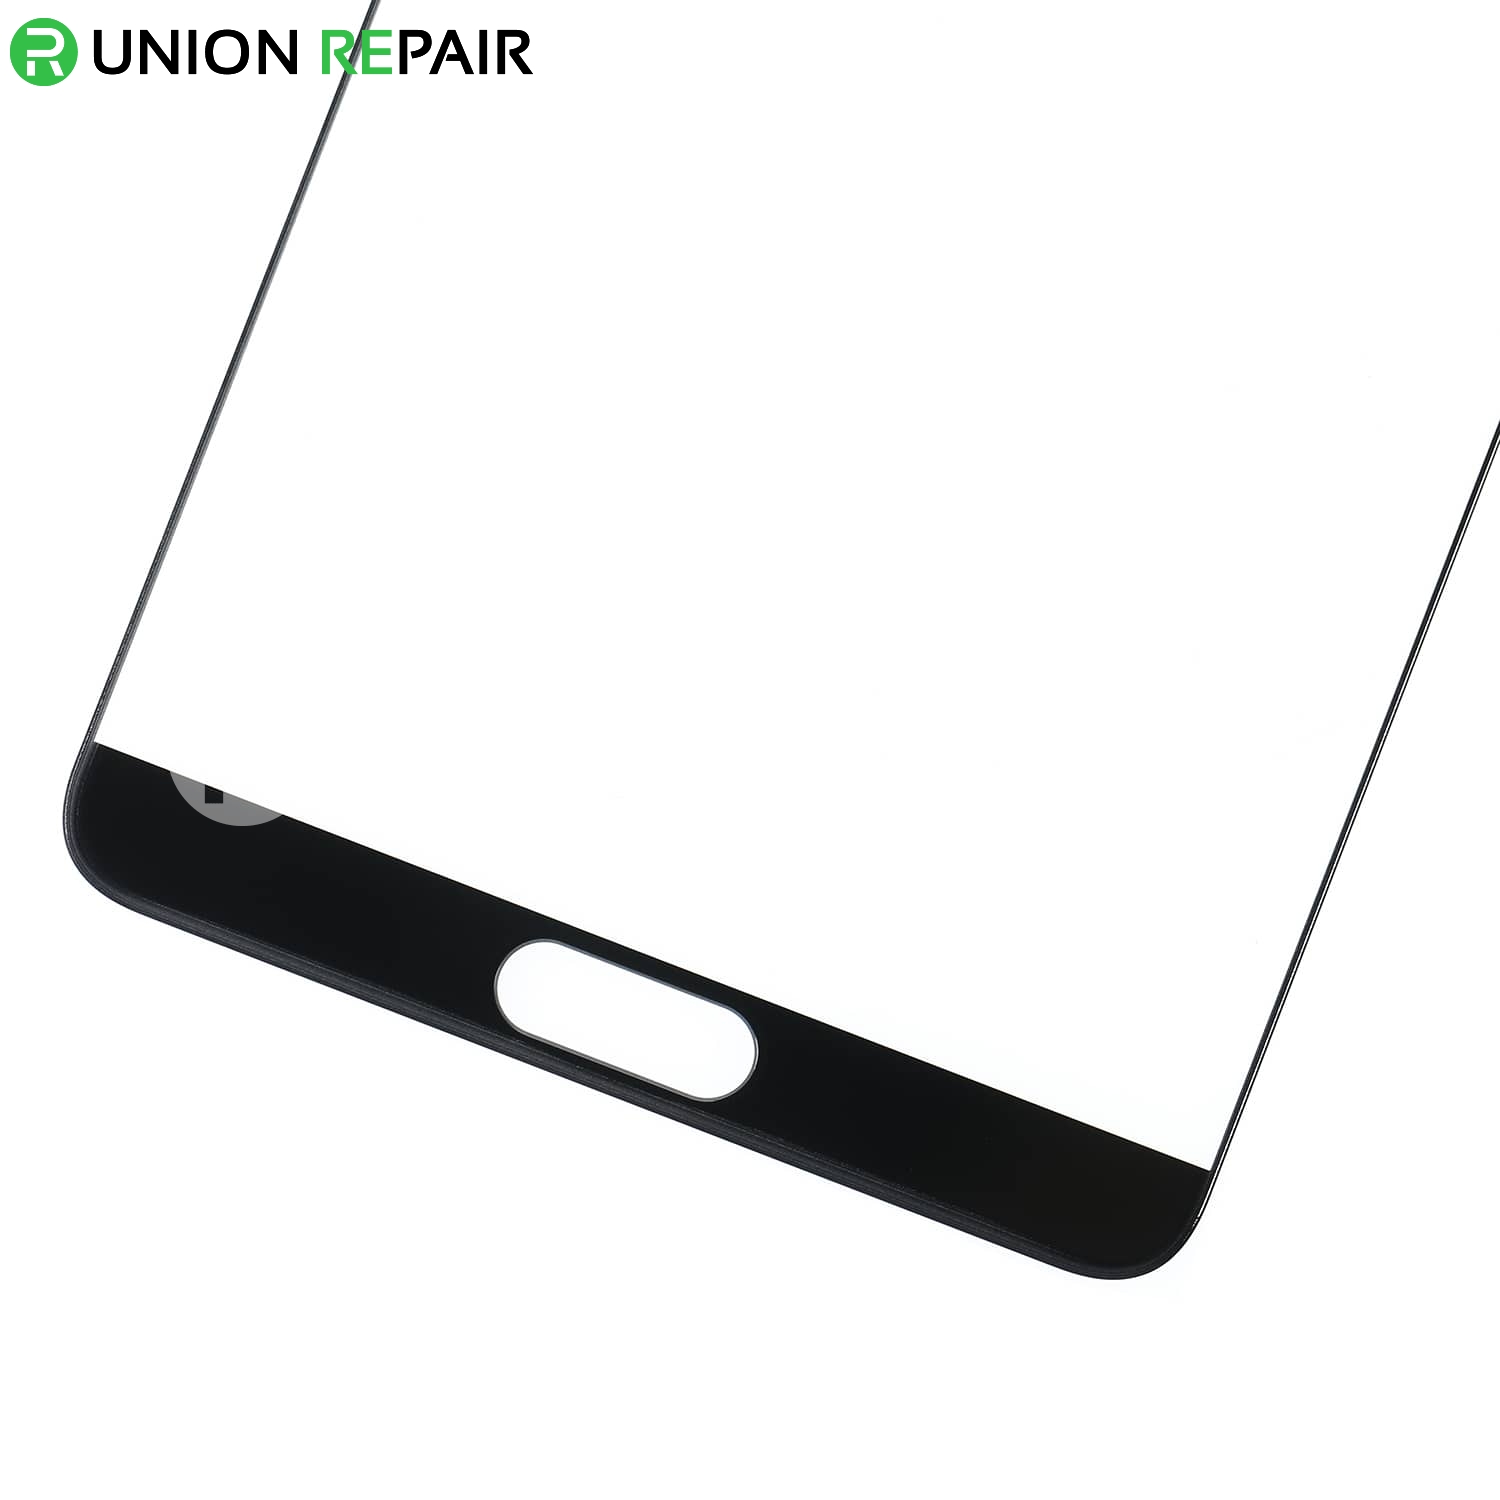  Replacement for Huawei Mate 10 Front Glass - Black, fig. 4 